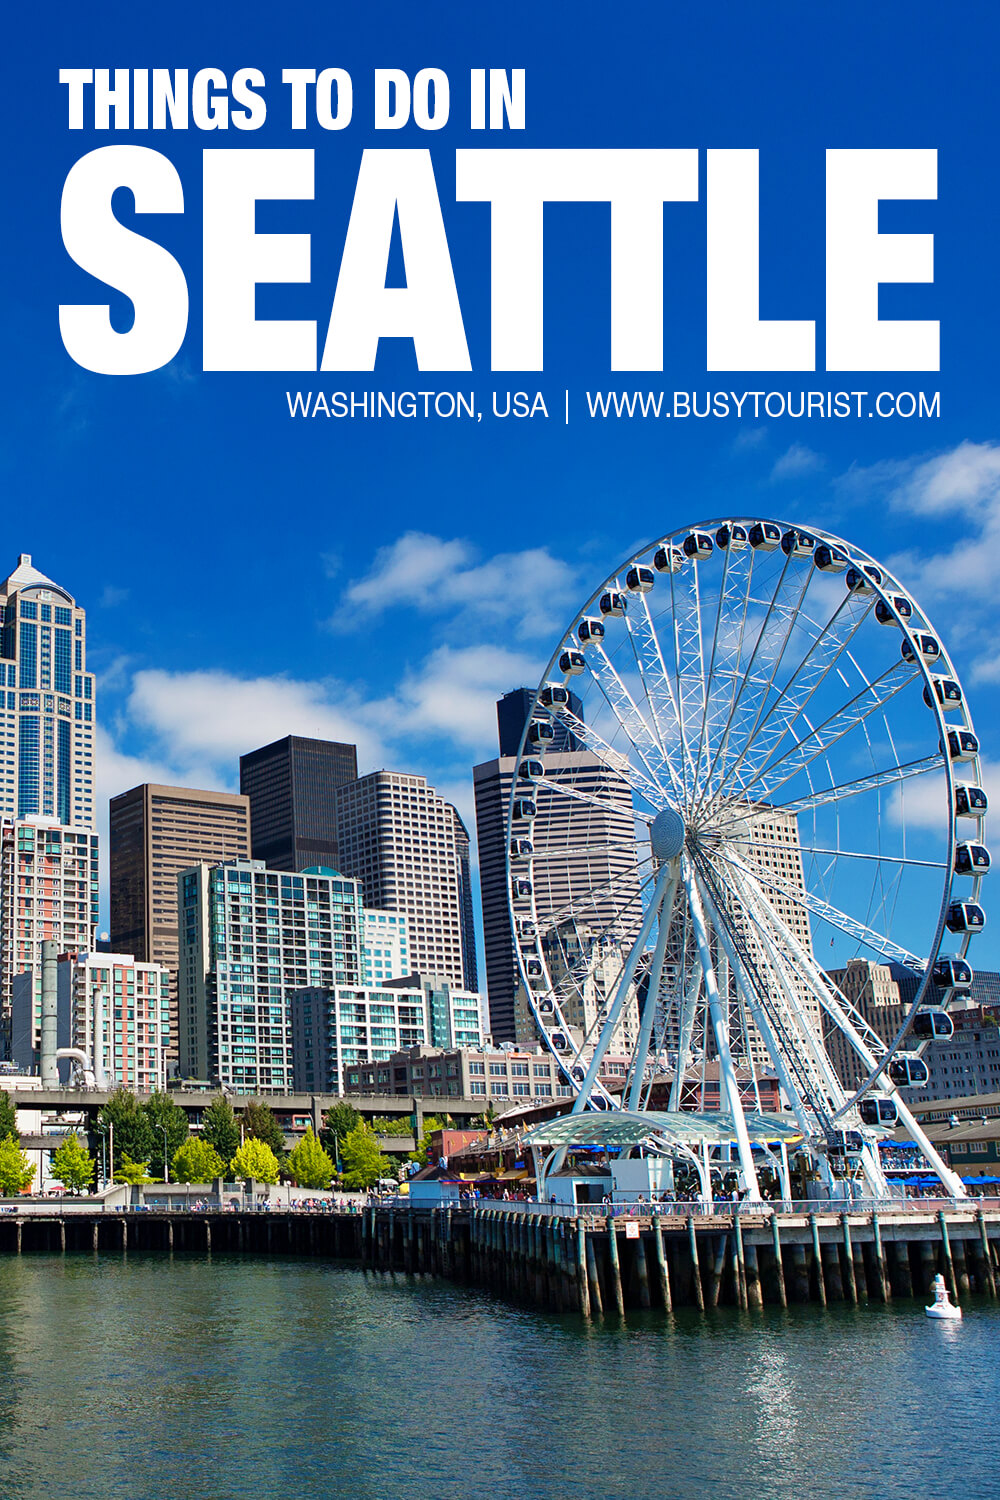 is 2 days enough to visit seattle